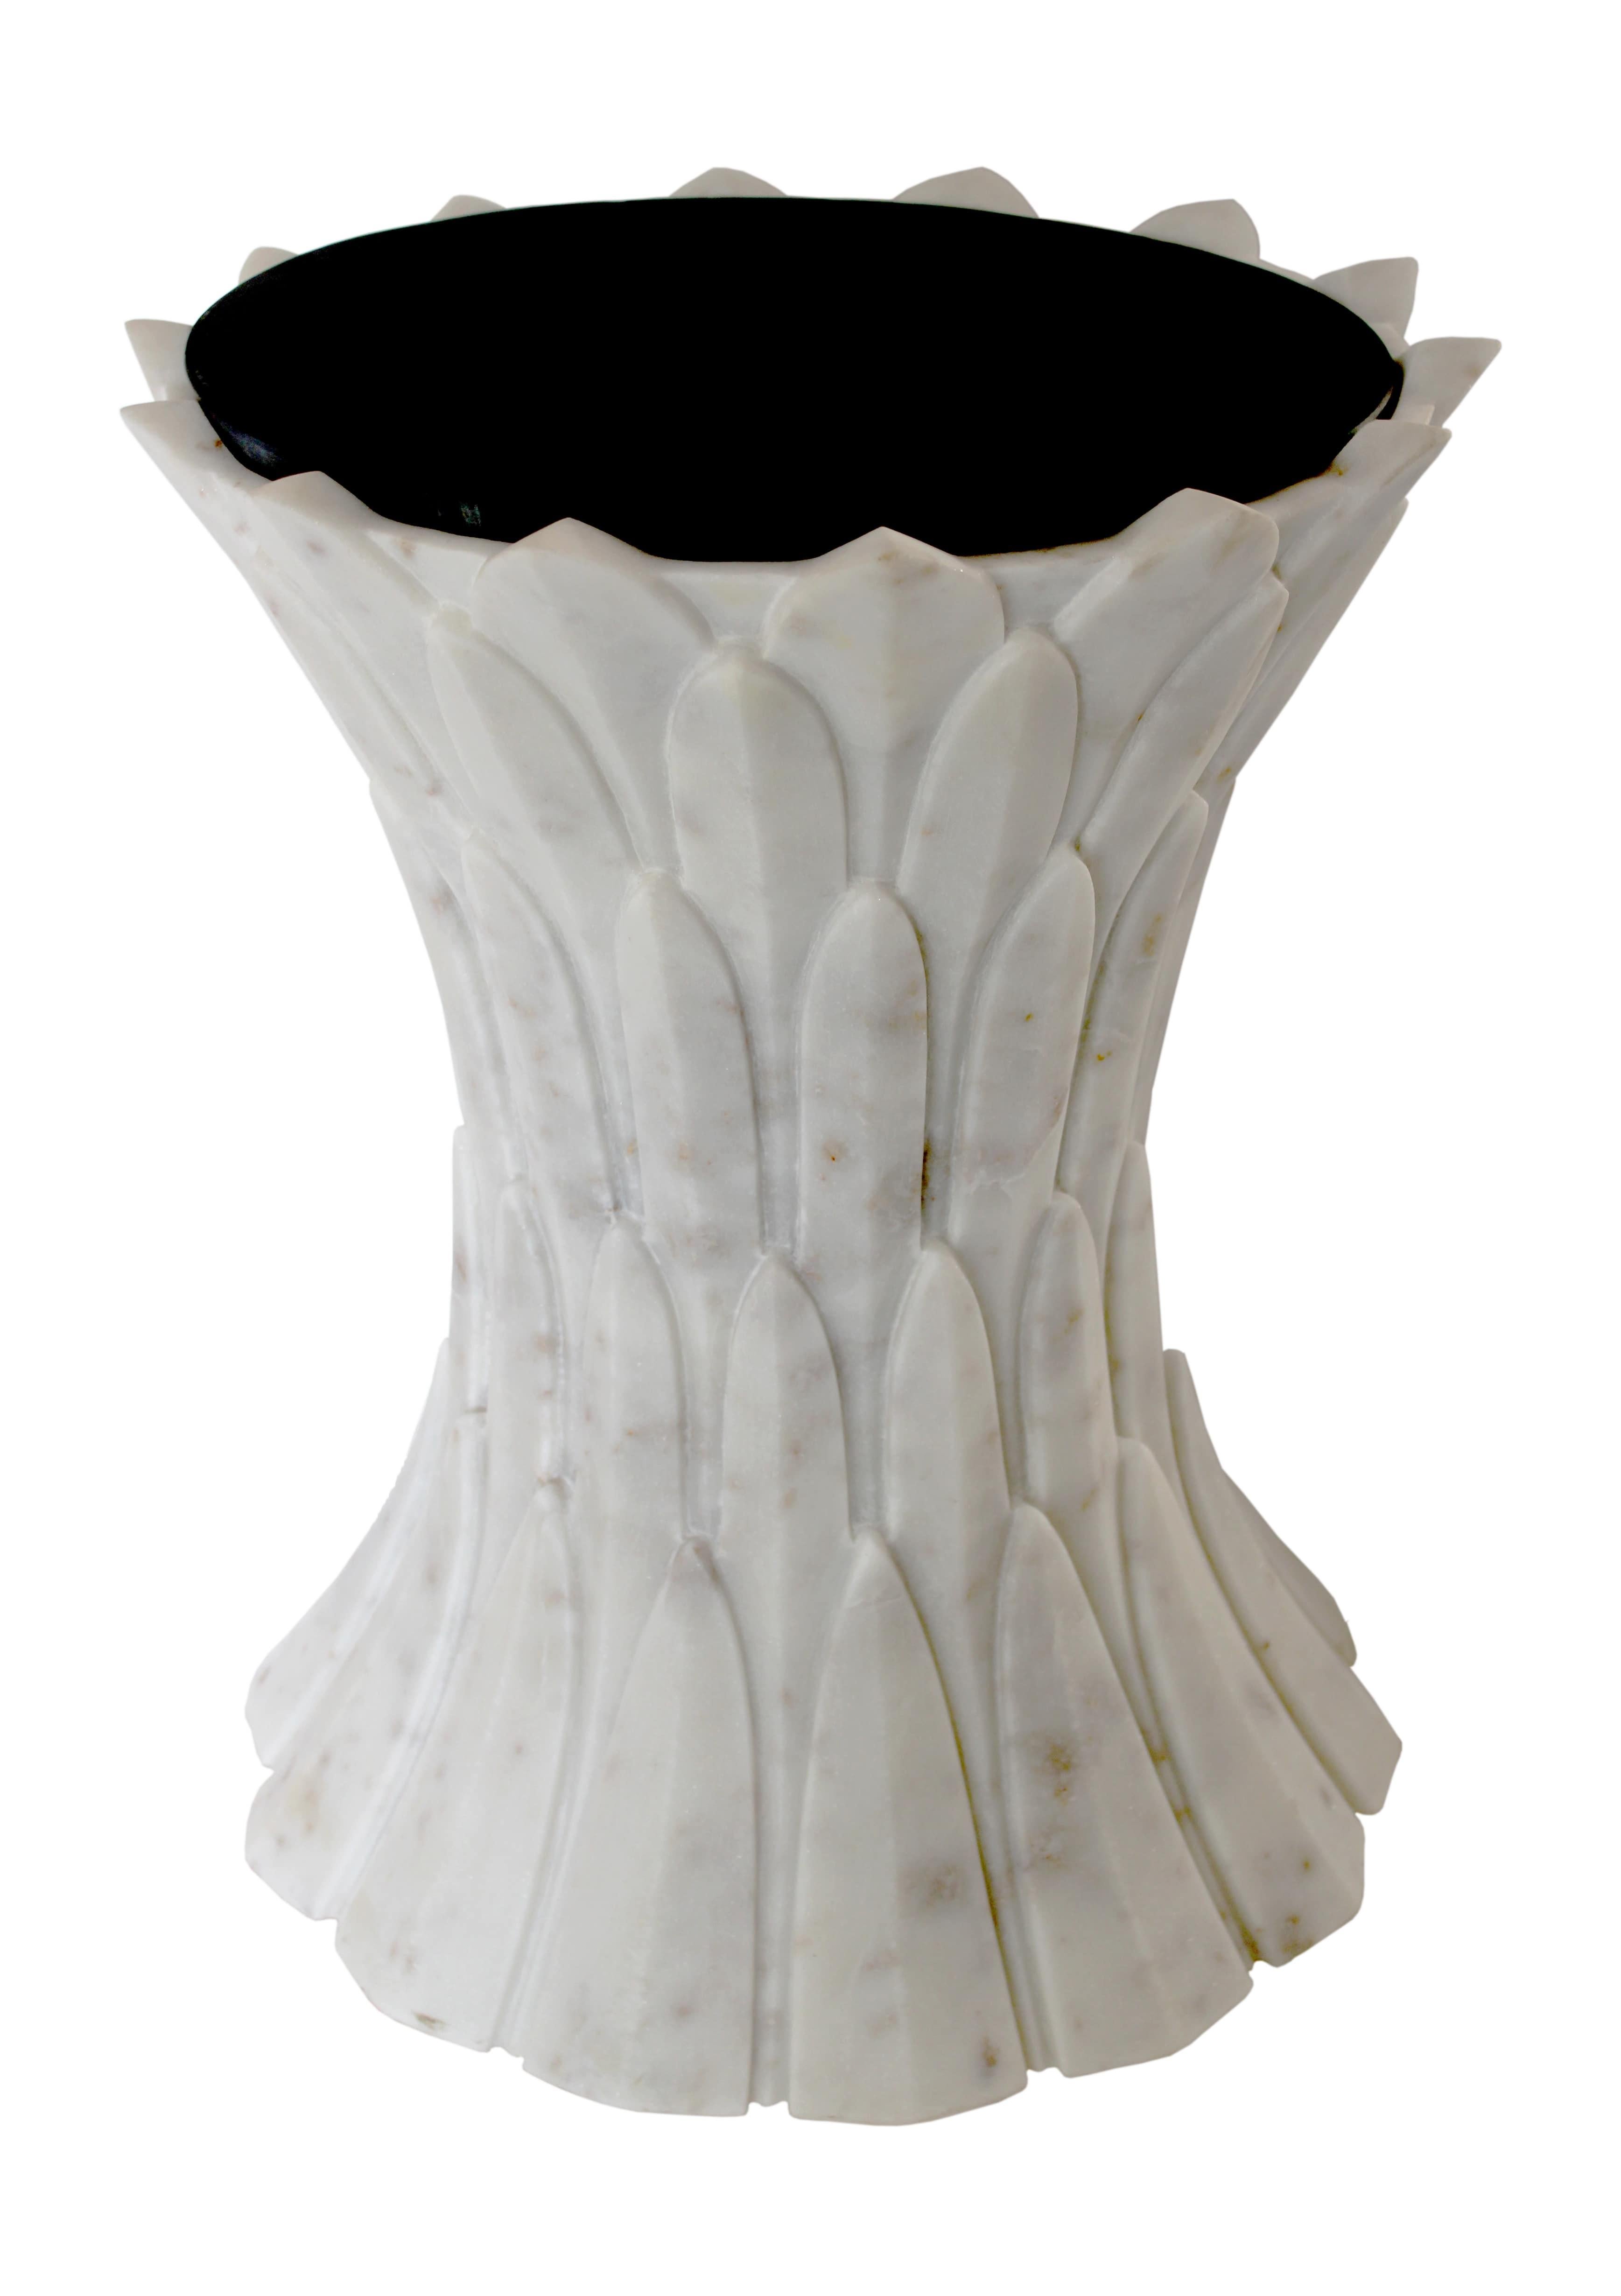 Contemporary Feathers Side Table in Agra White Marble Handcrafted In India For Sale